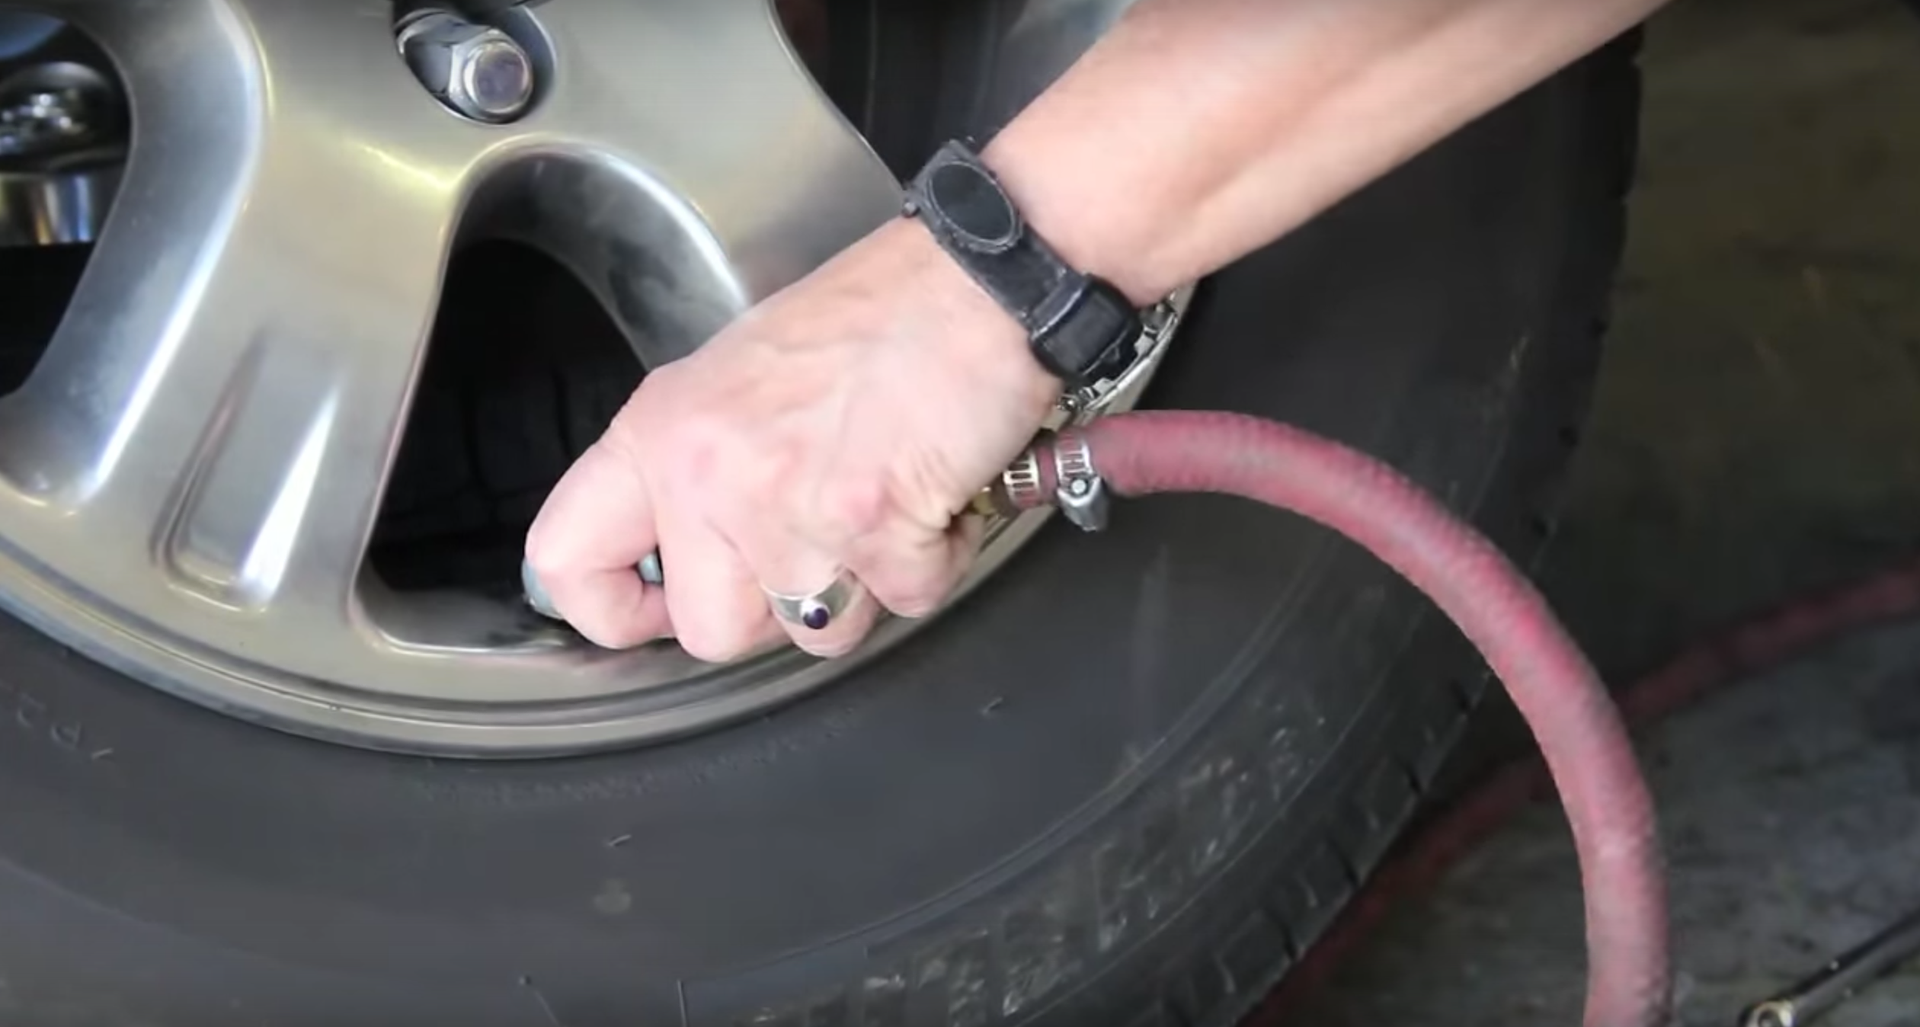 How to check your tire pressure: Important way to stay safe on the road